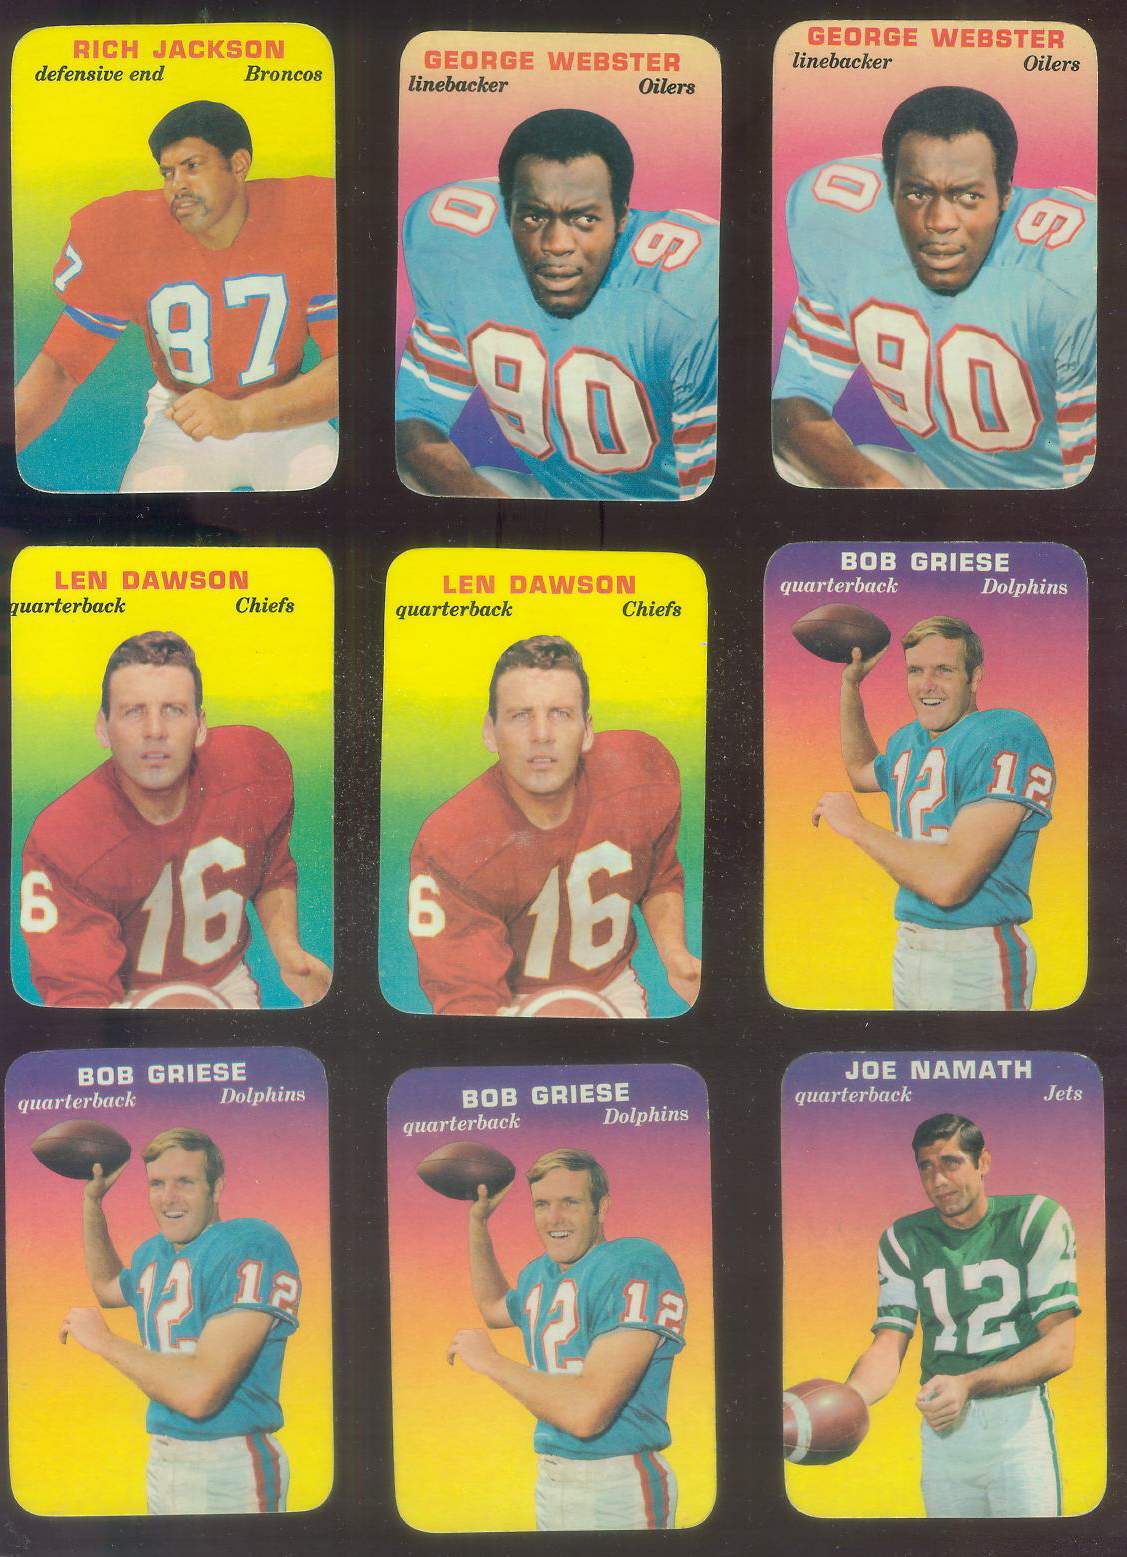 1970 Topps Glossy #28 Bob Griese - FB Insert (Dolphins) Football cards value